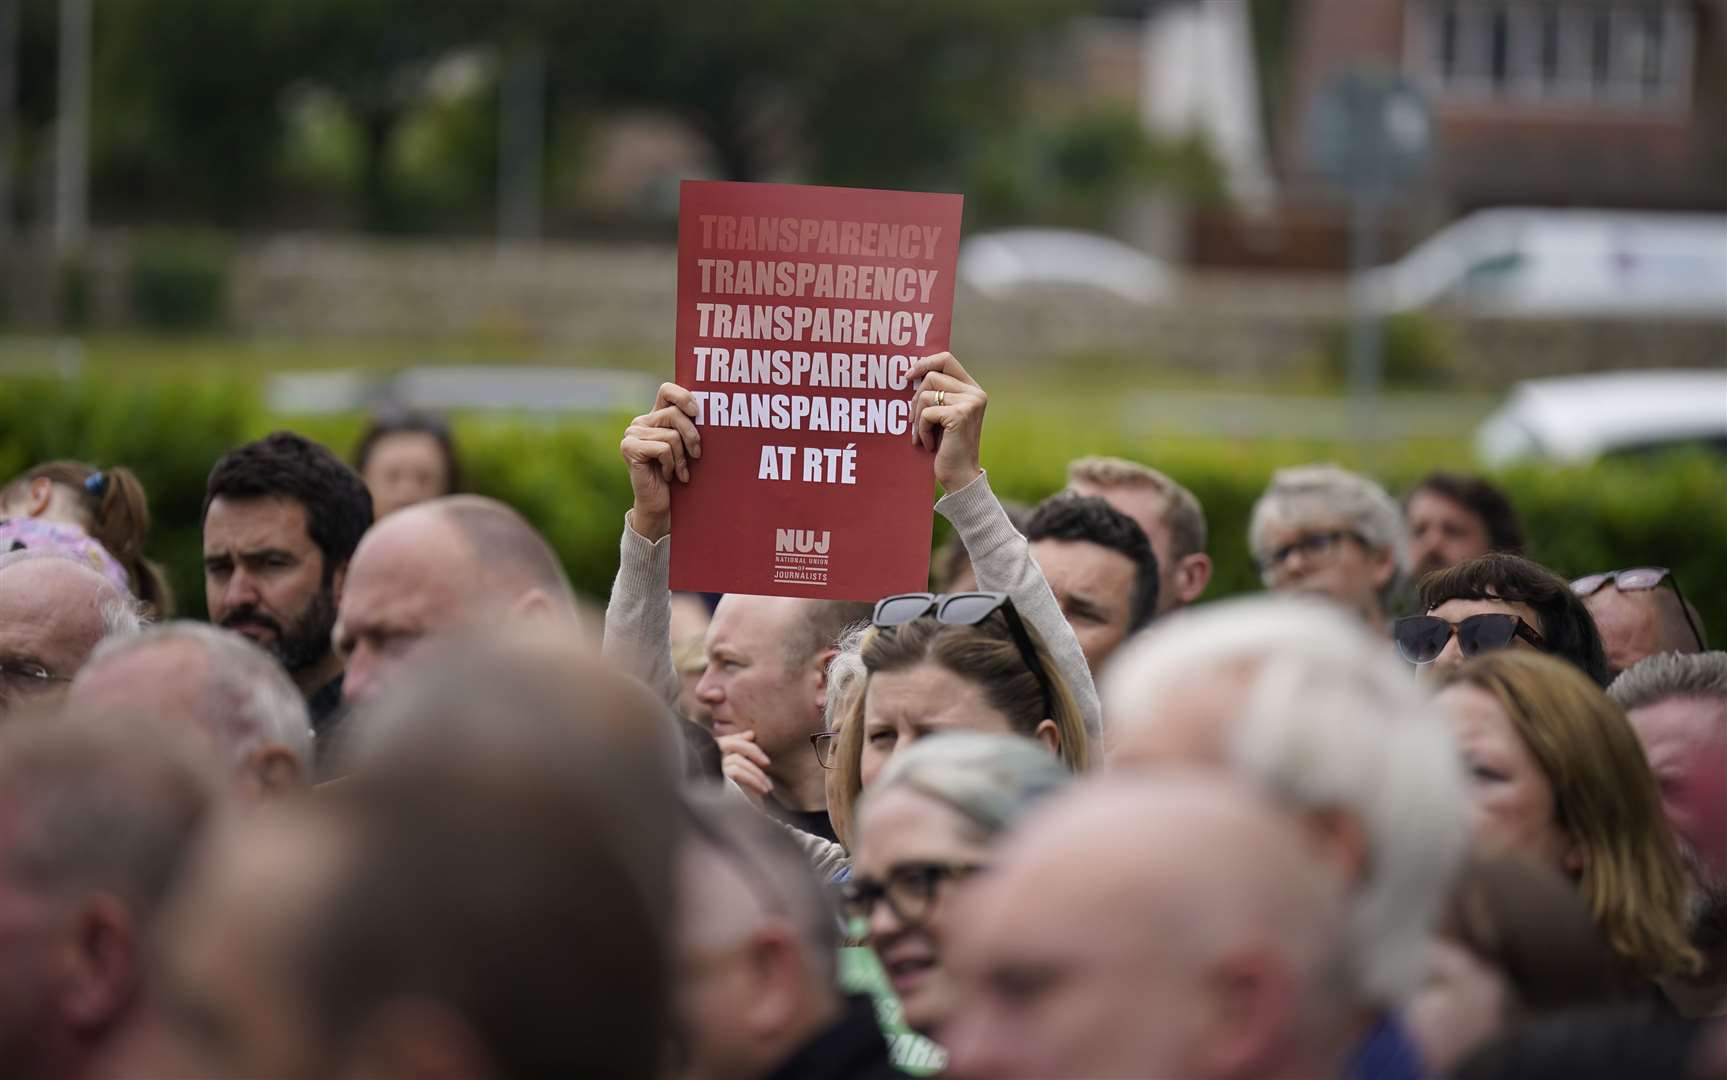 Members of staff from RTE take part in a protest at the broadcaster’s headquarters in Donnybrook (PA/Niall Carson)